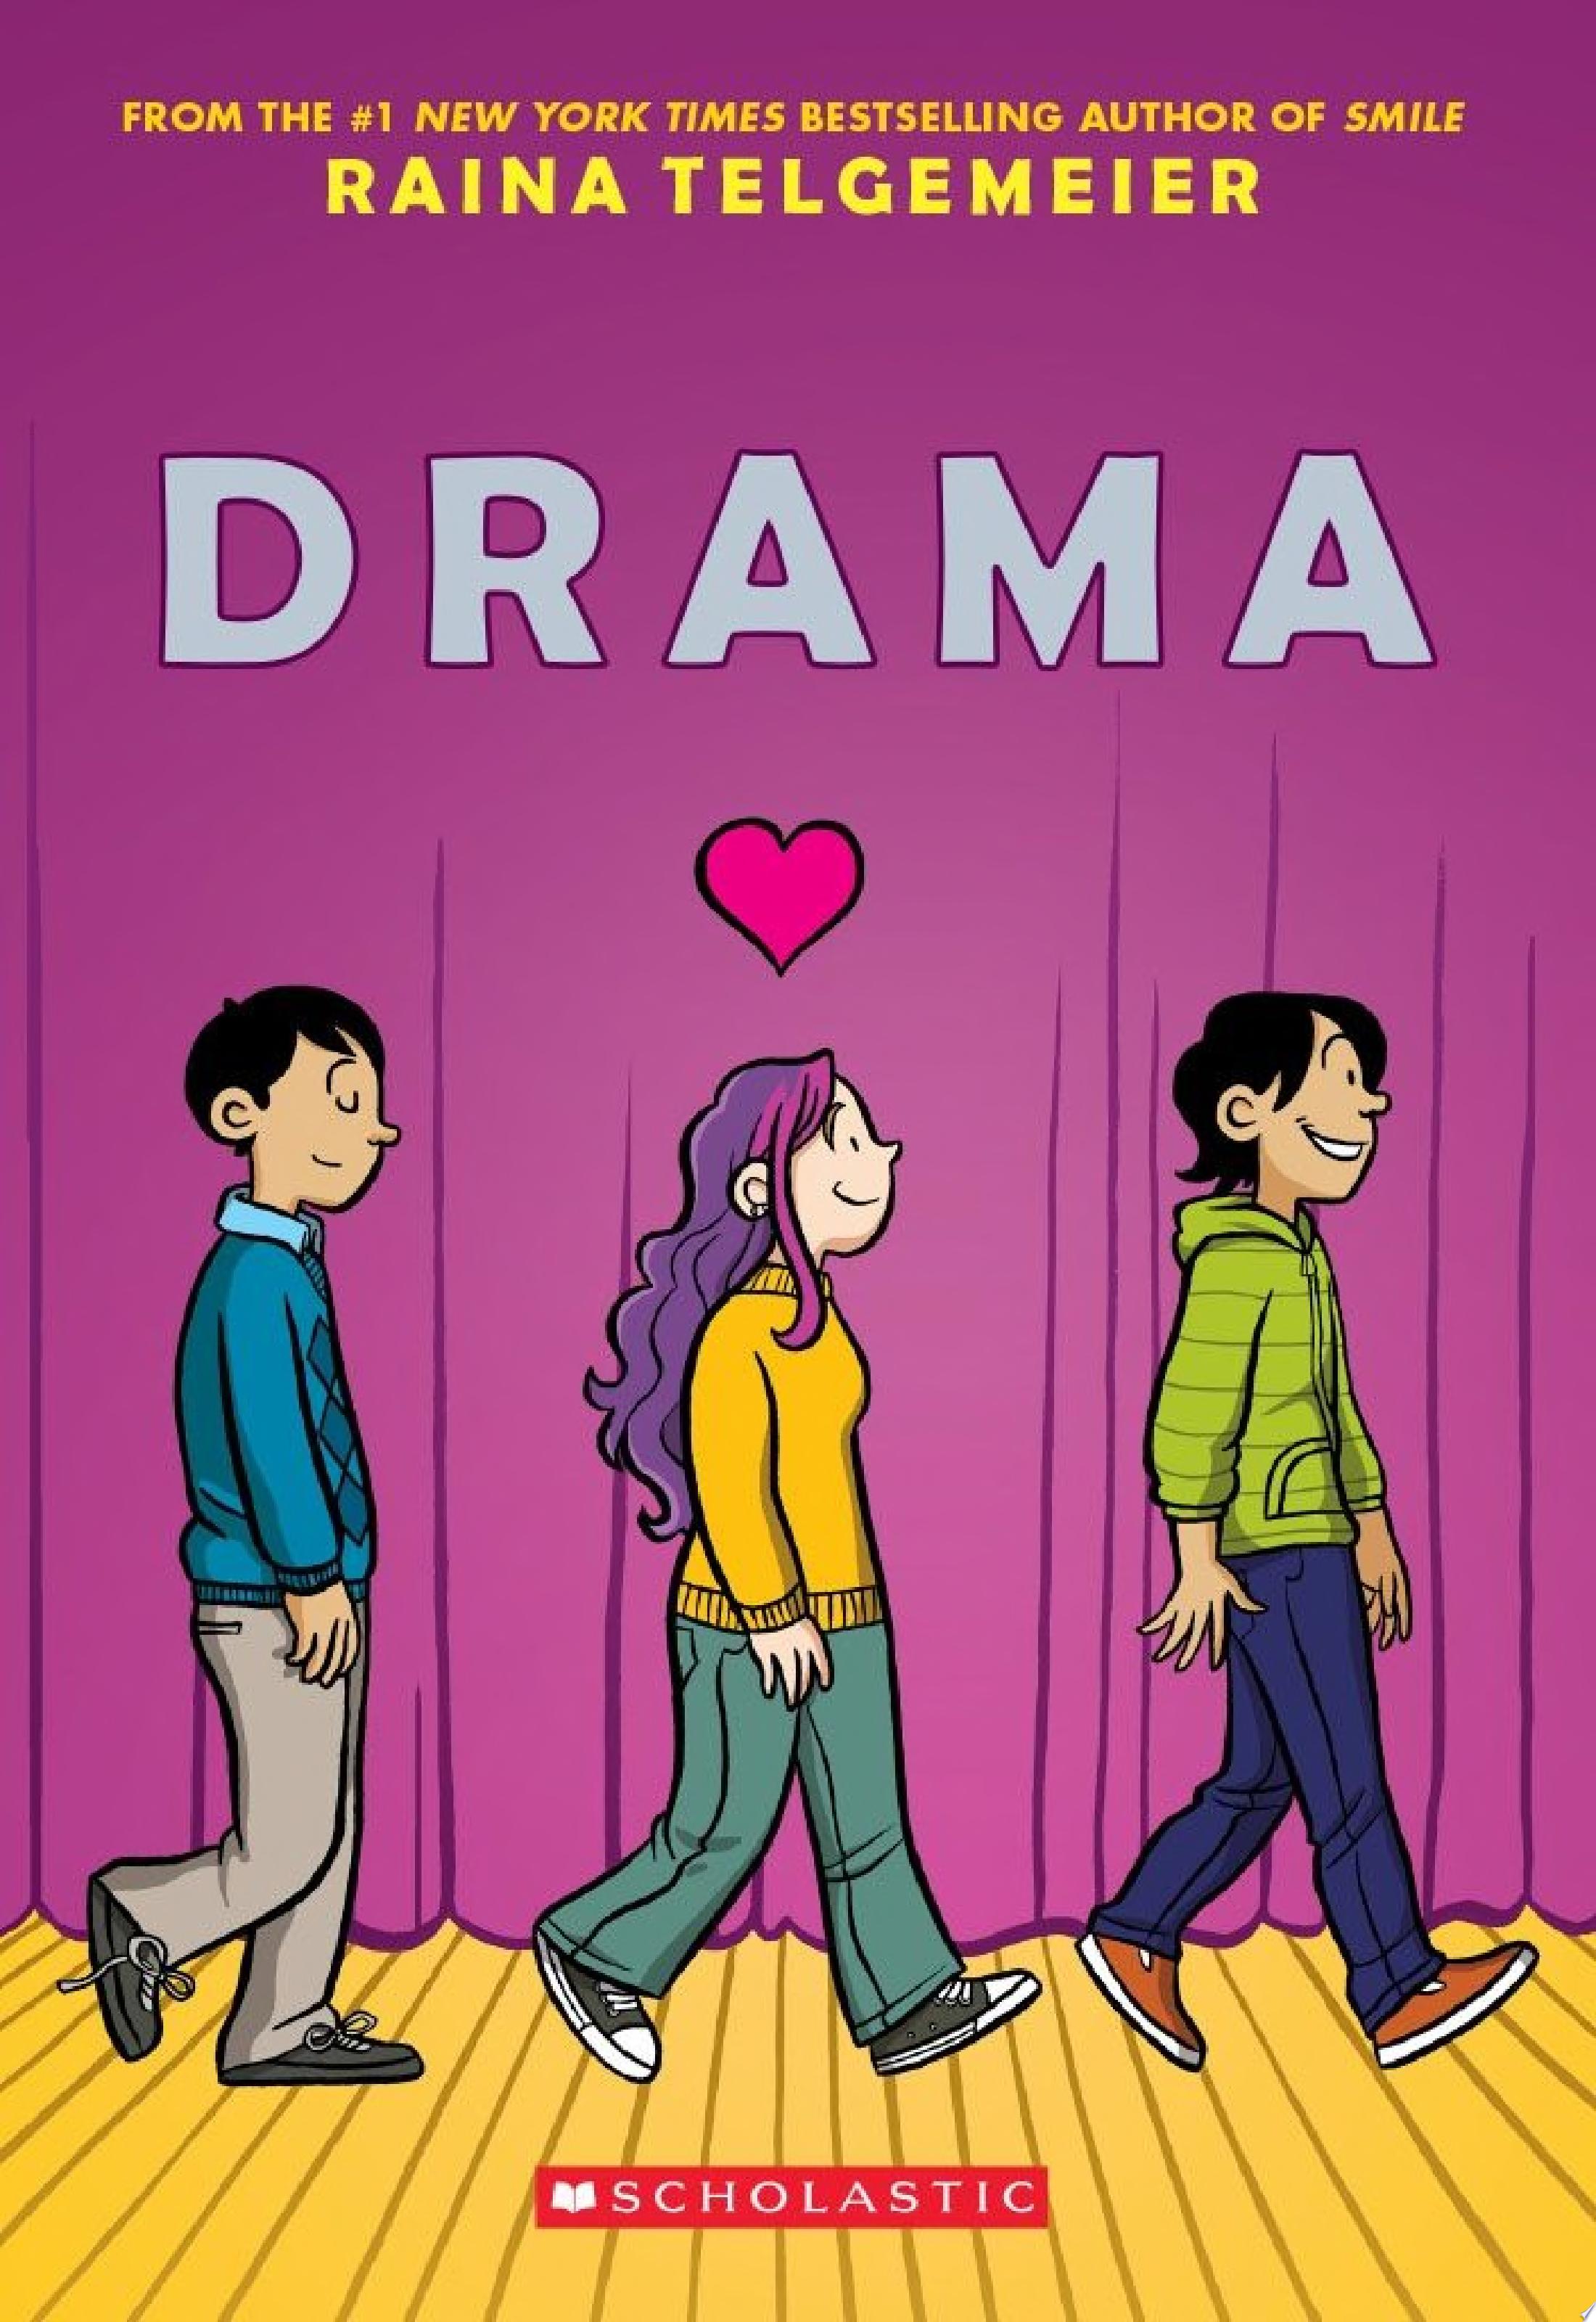 Image for "Drama: A Graphic Novel"